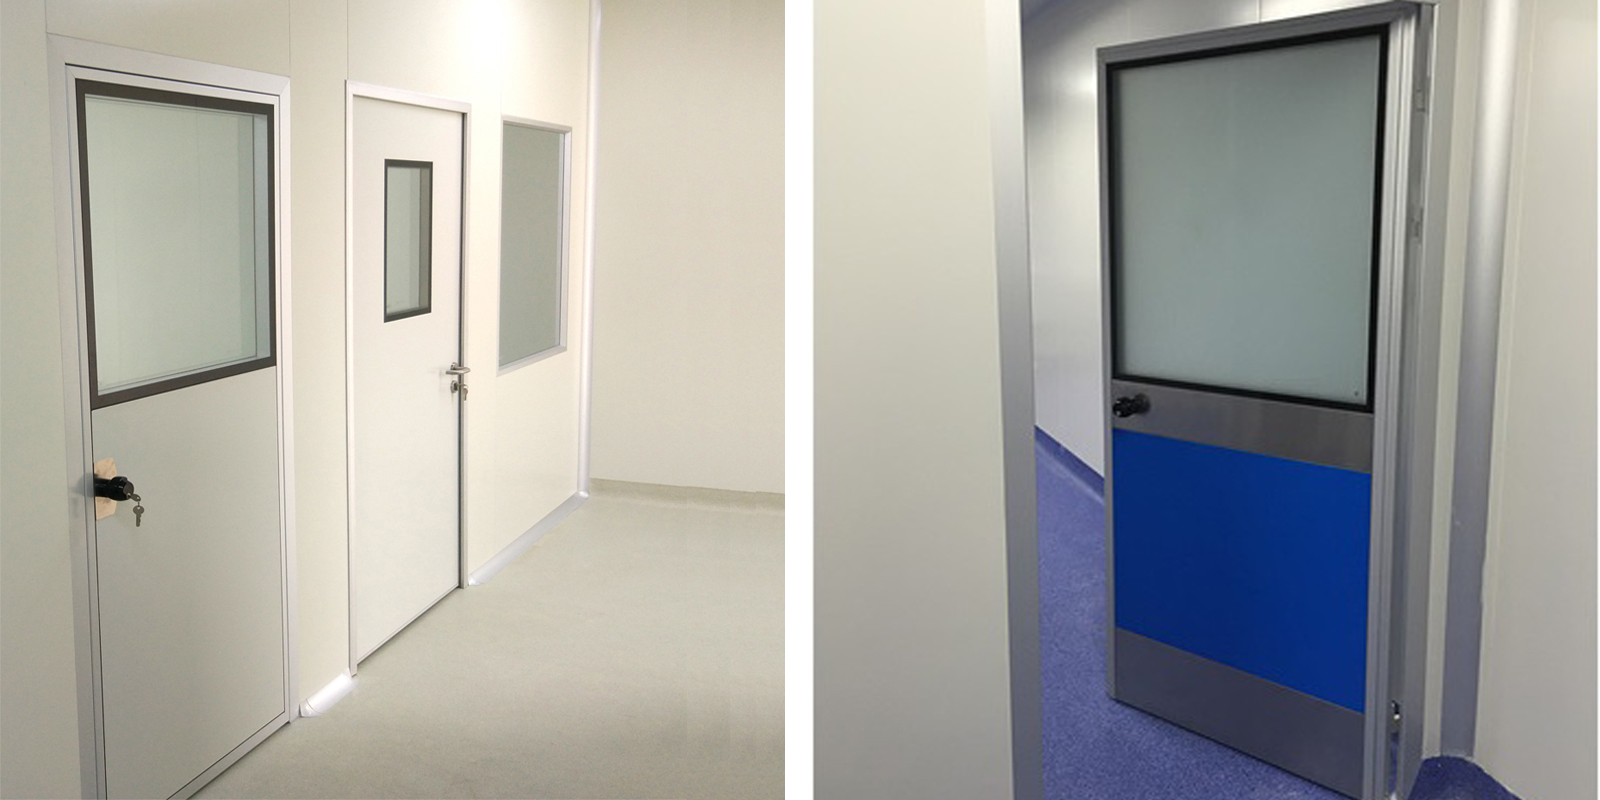 The view cleanroom wall panel of door is flush with the surface of the door leaf, which isboth beautiful and clean.